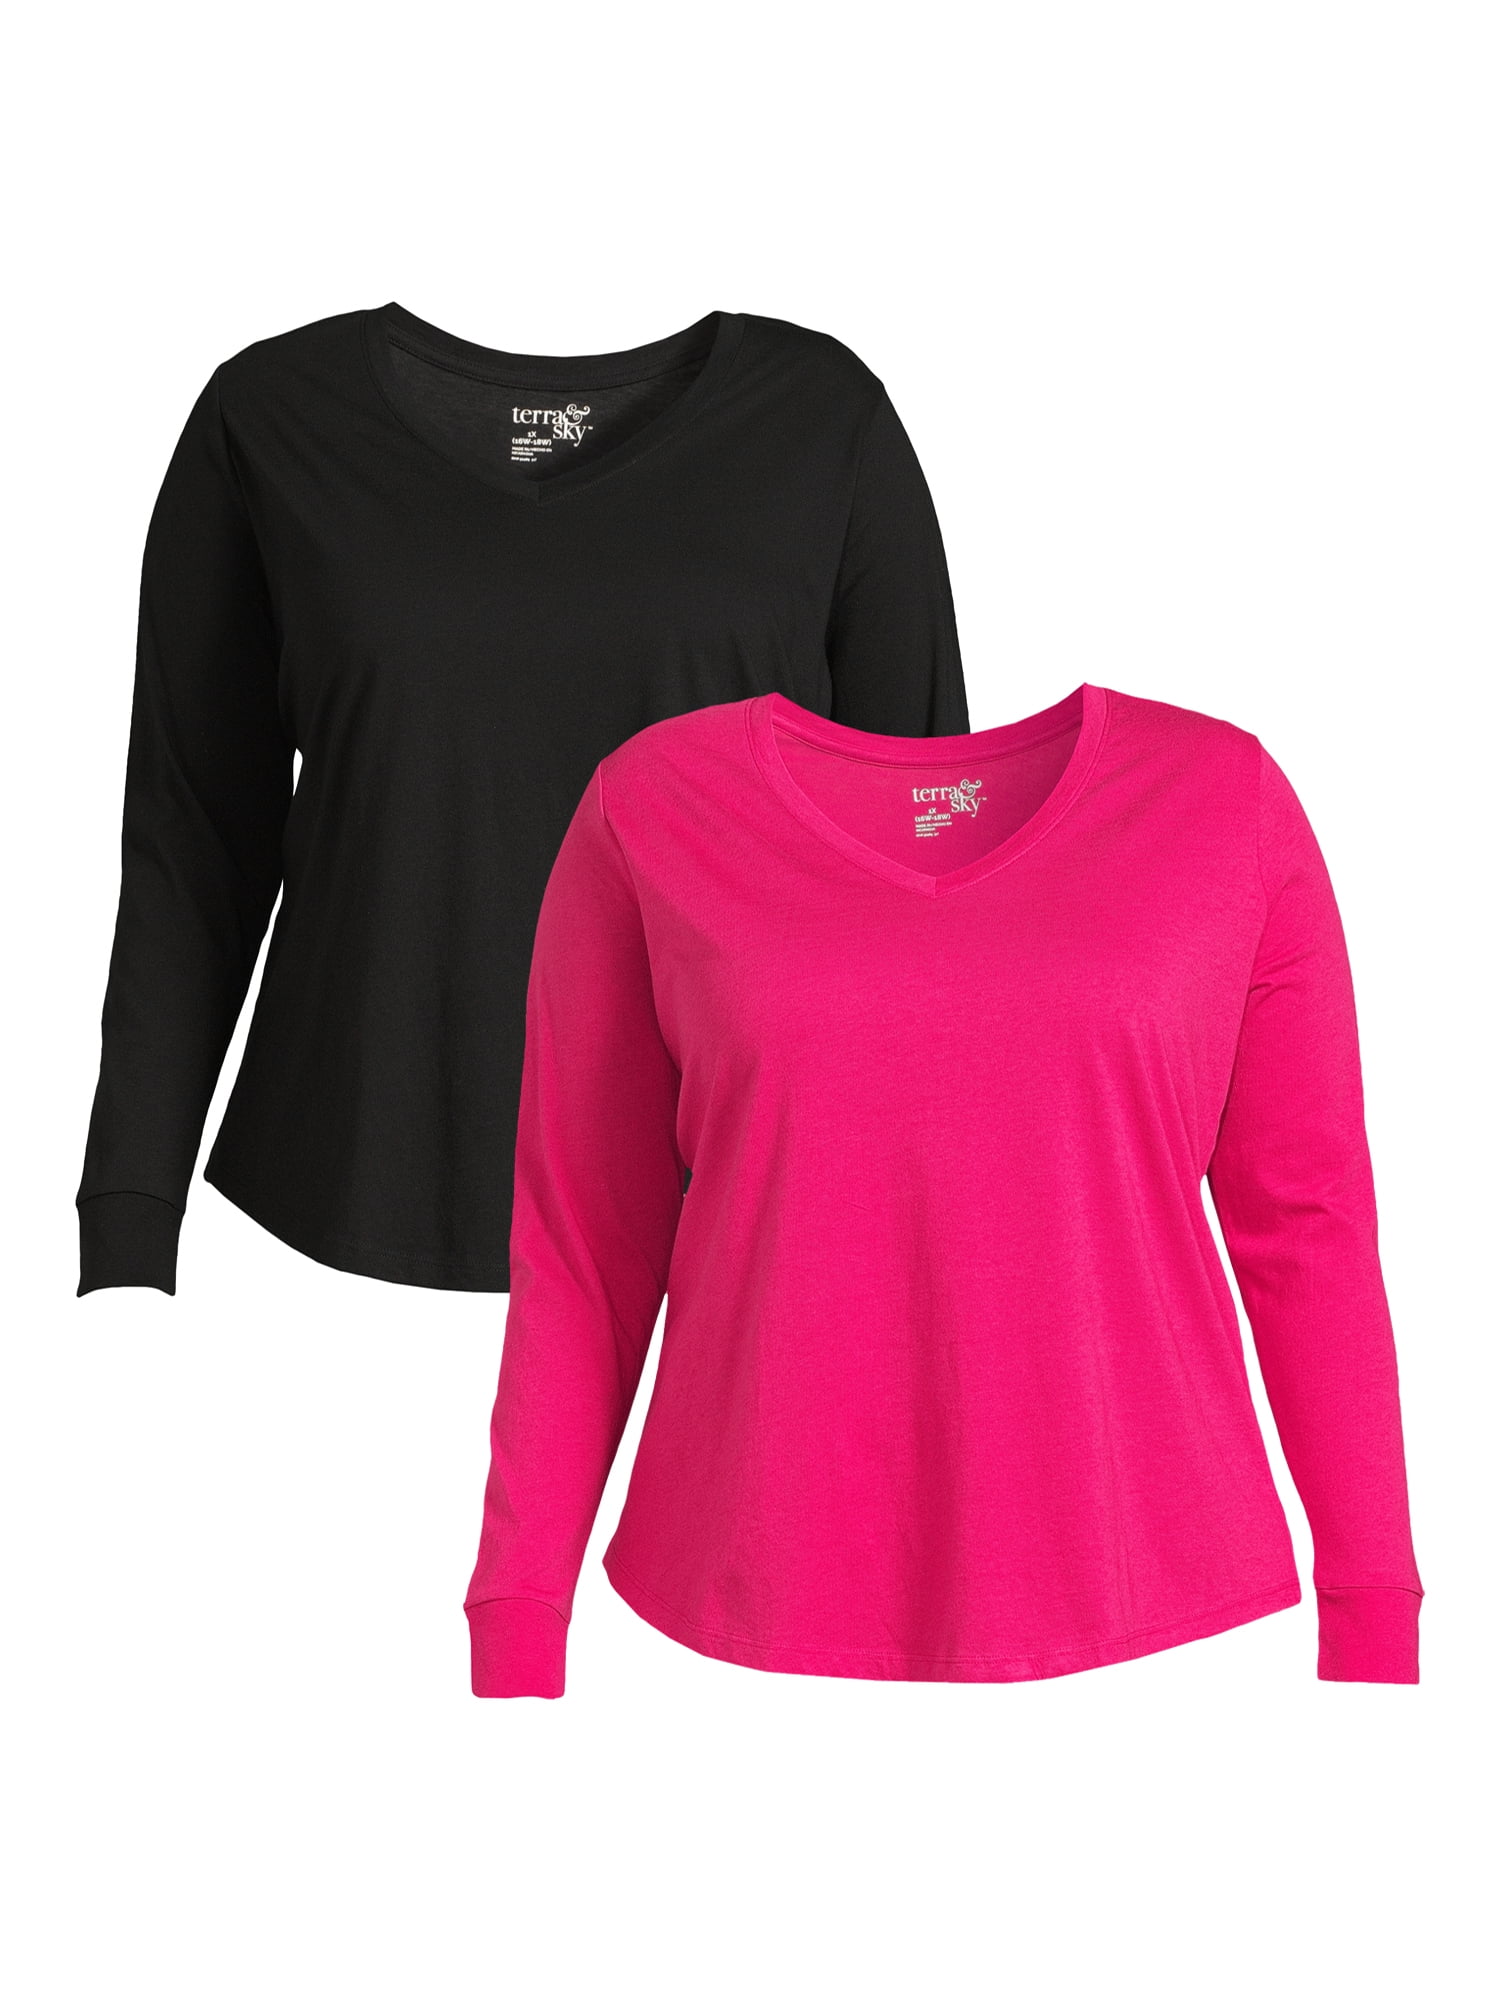 T Shirt V Neck Long Sleeve Active Basic Top Size S-XL Plus 1X-2X STORE  CLOSING